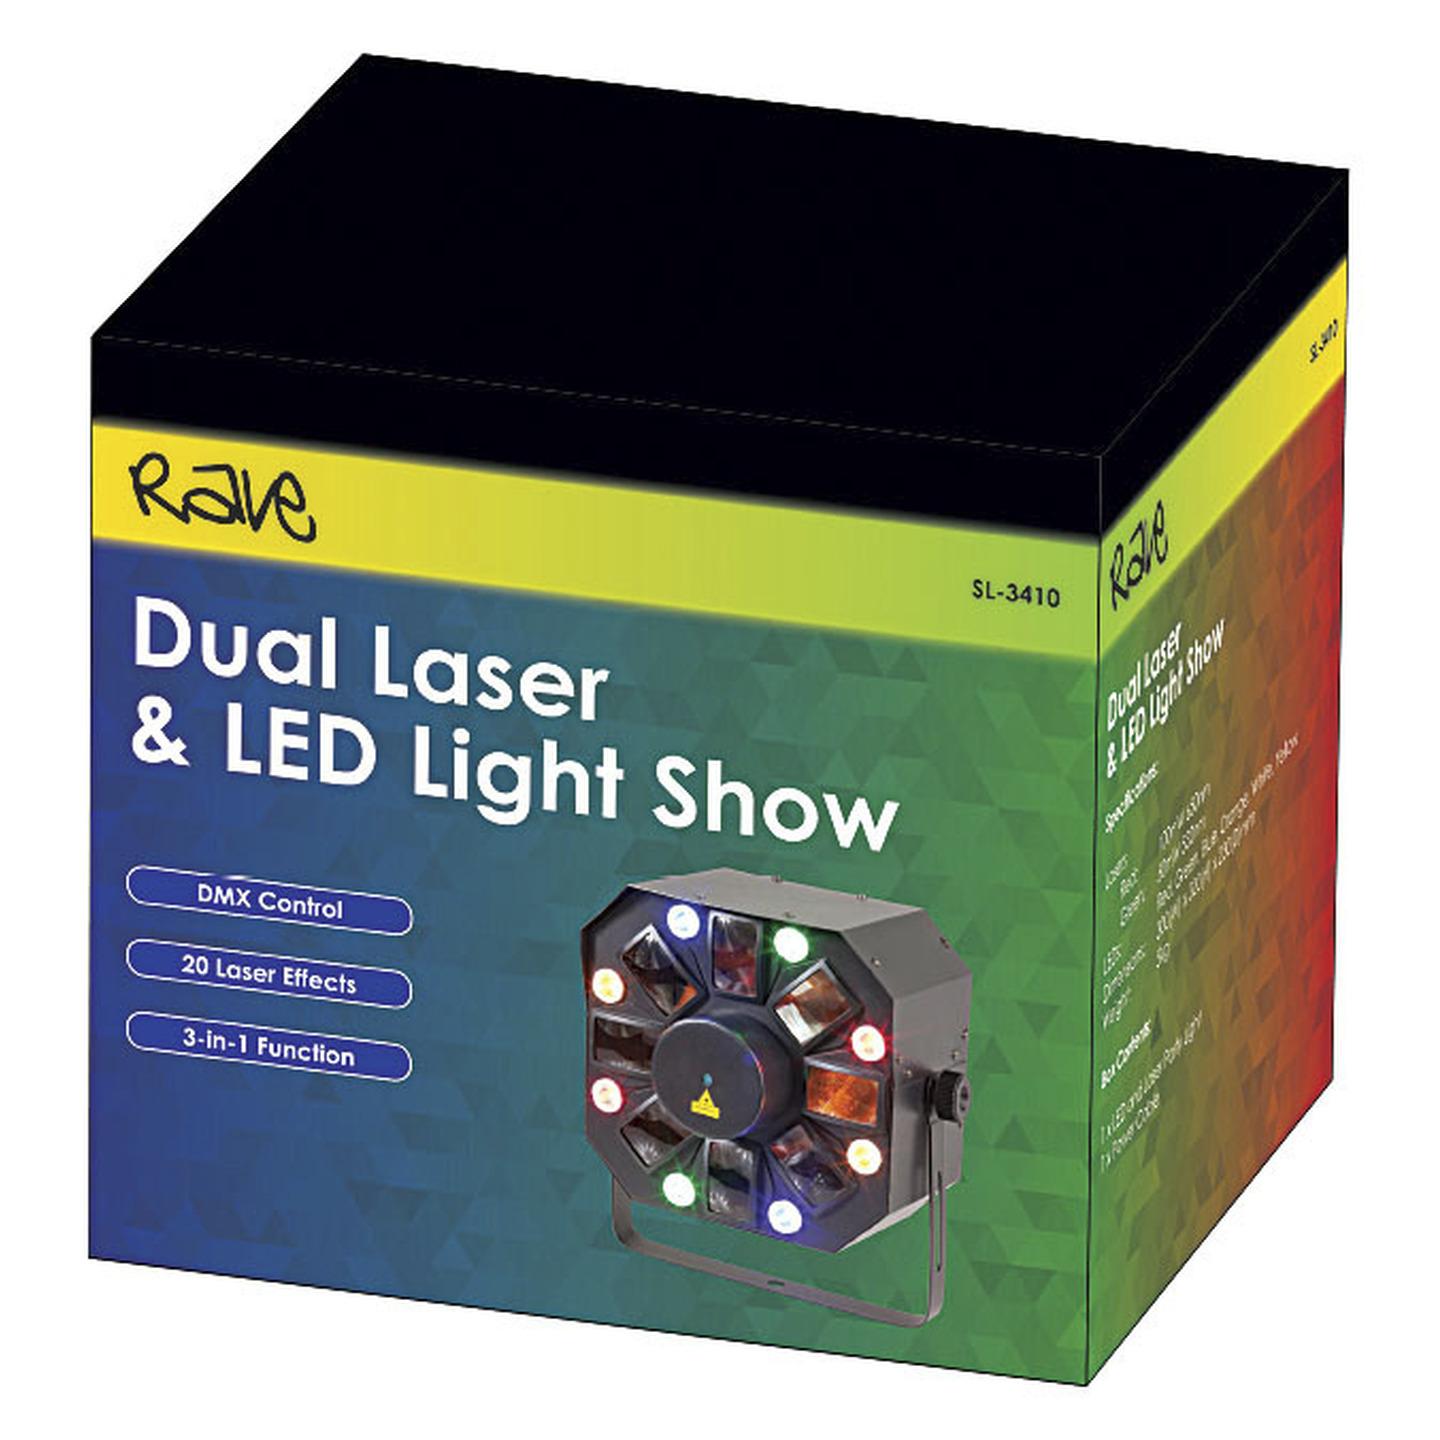 Dual Laser & LED Light Show with DMX Control